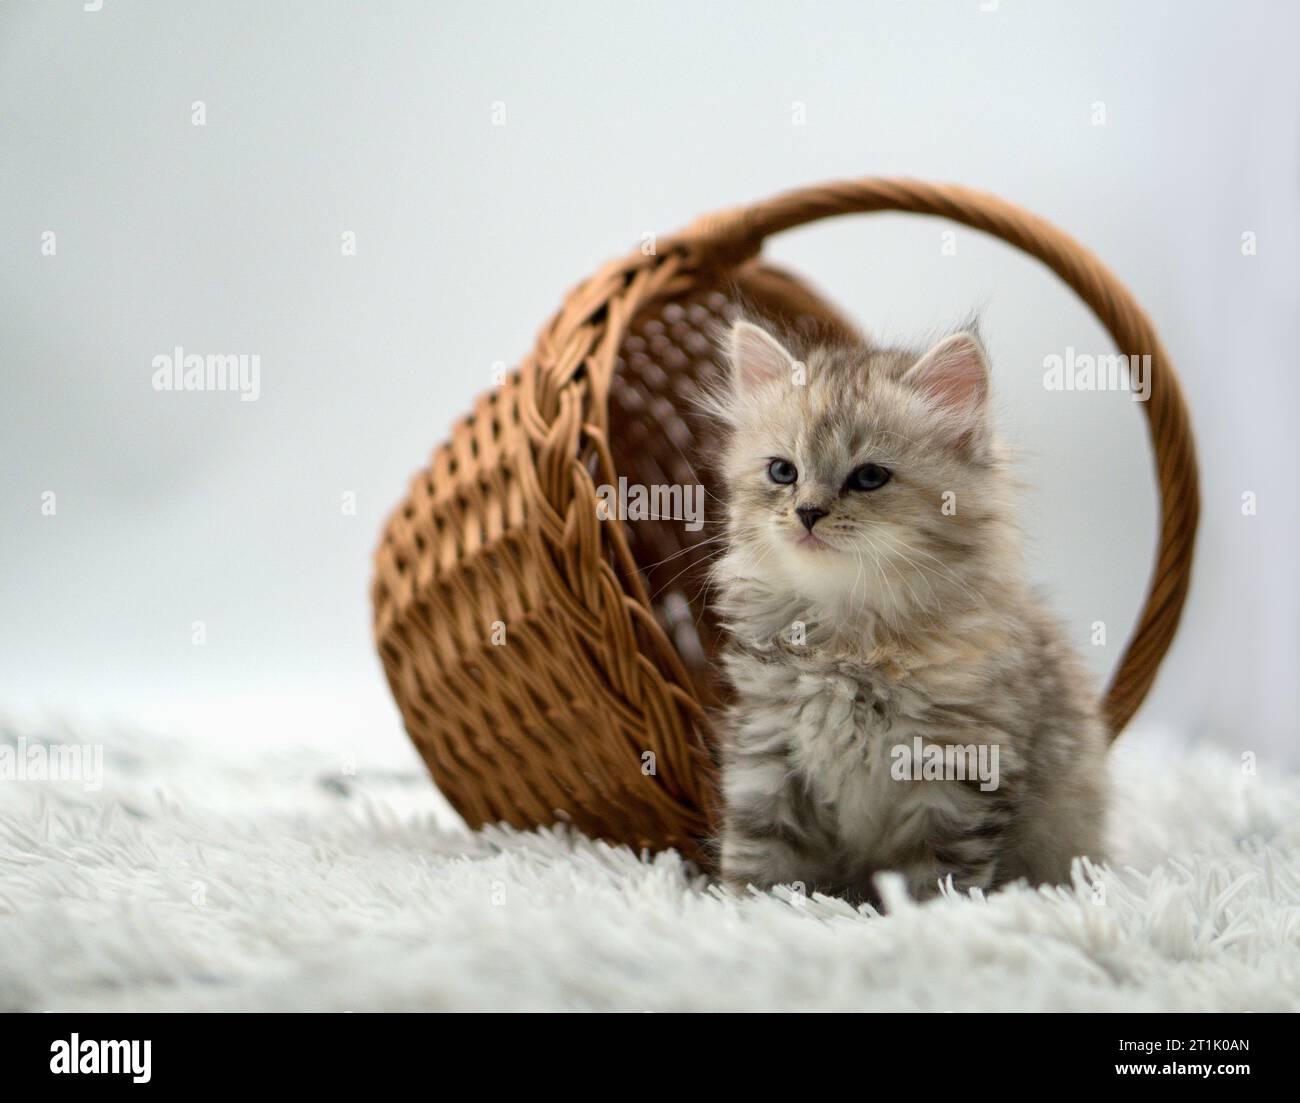 Siberian cat on colored backgrounds Stock Photo